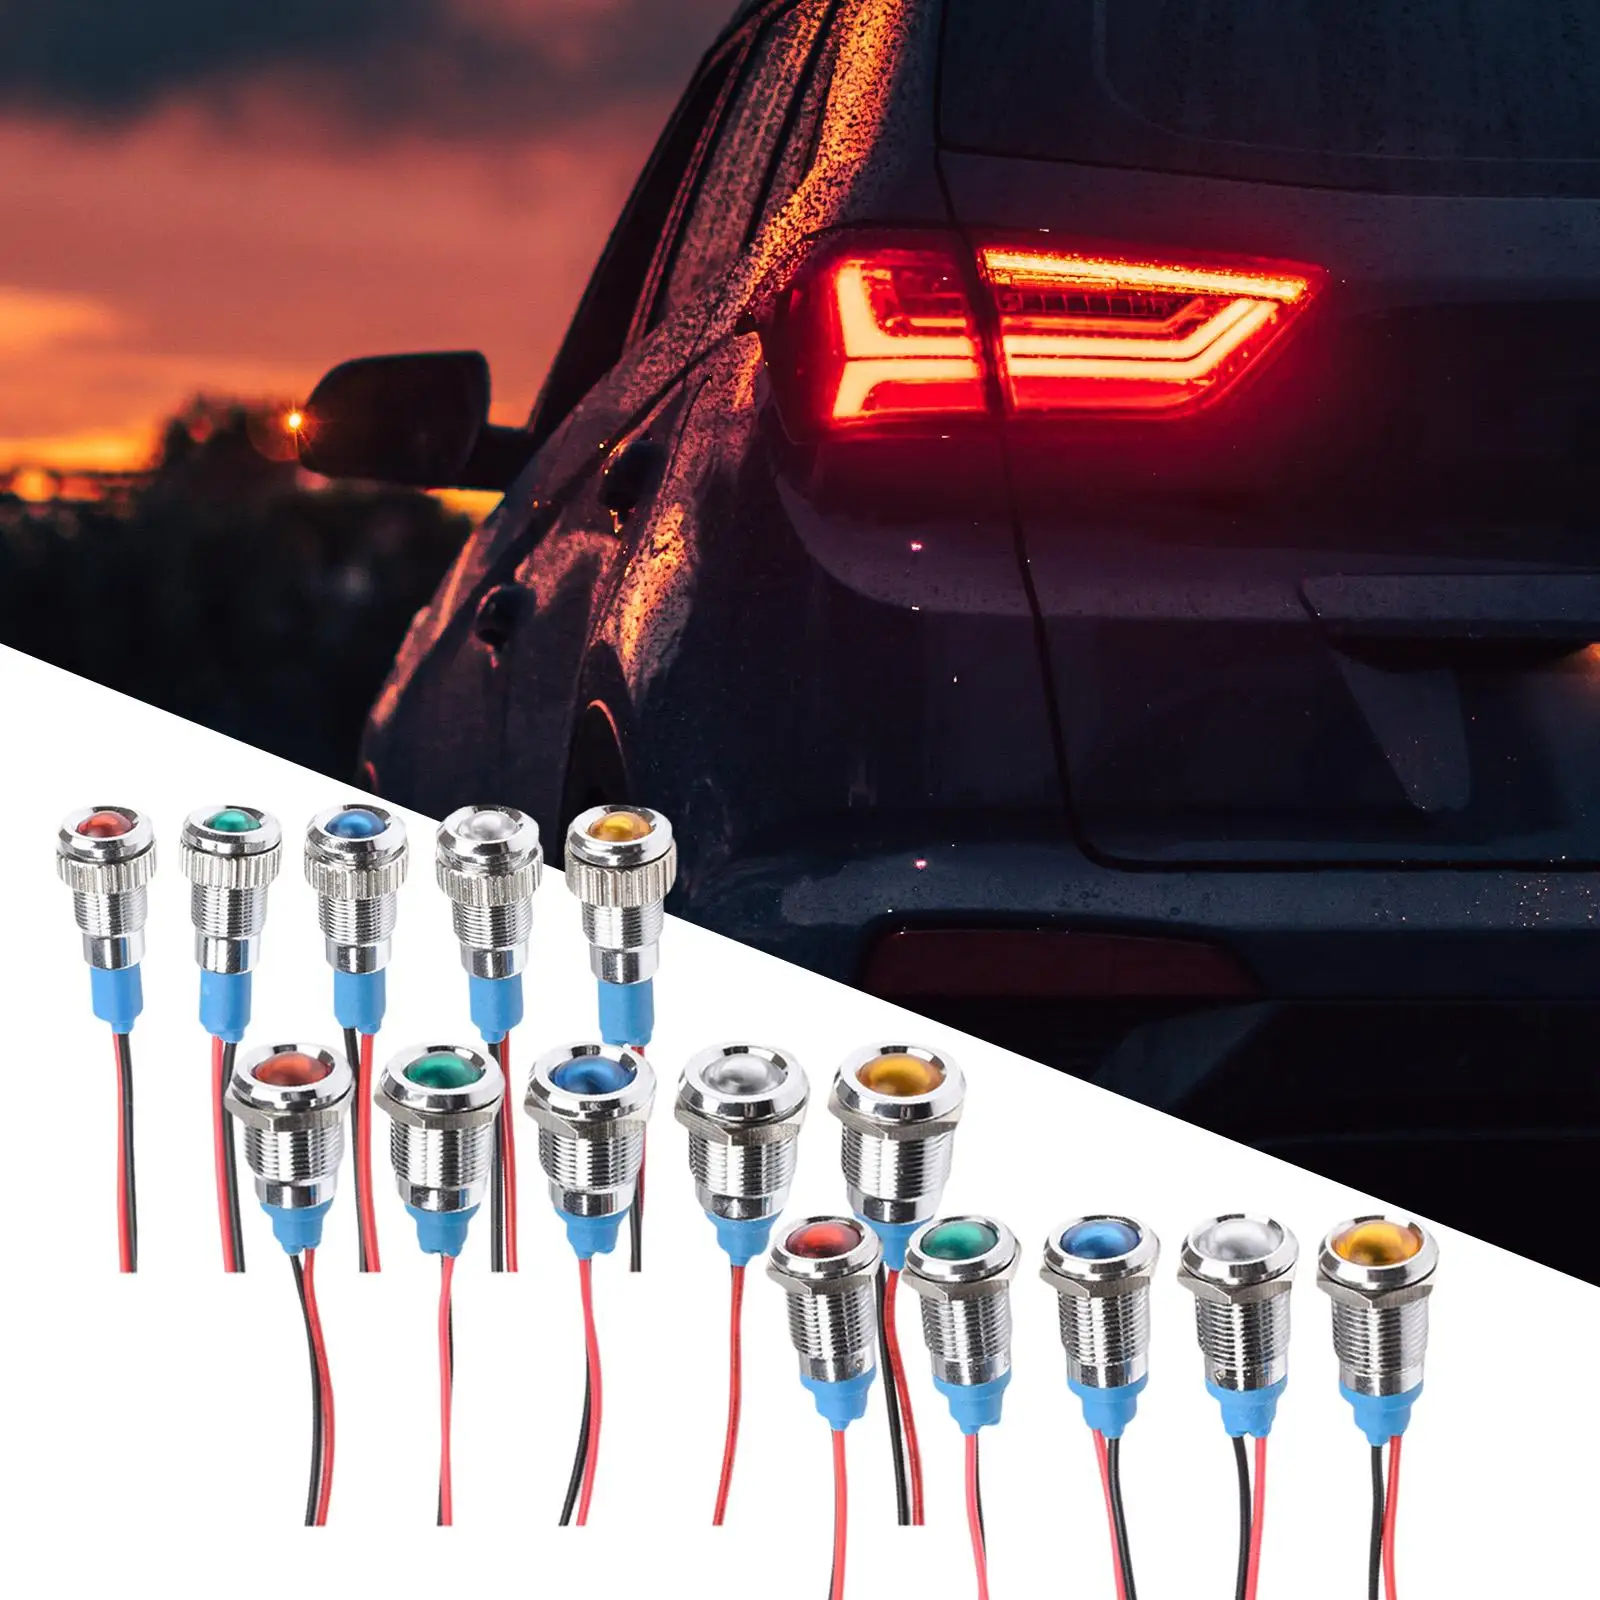 5 Pieces LED Metal Indicator Light, with Wire Lamp Waterproof for Motorcycle Car Pilots Directional Light Boat Truck